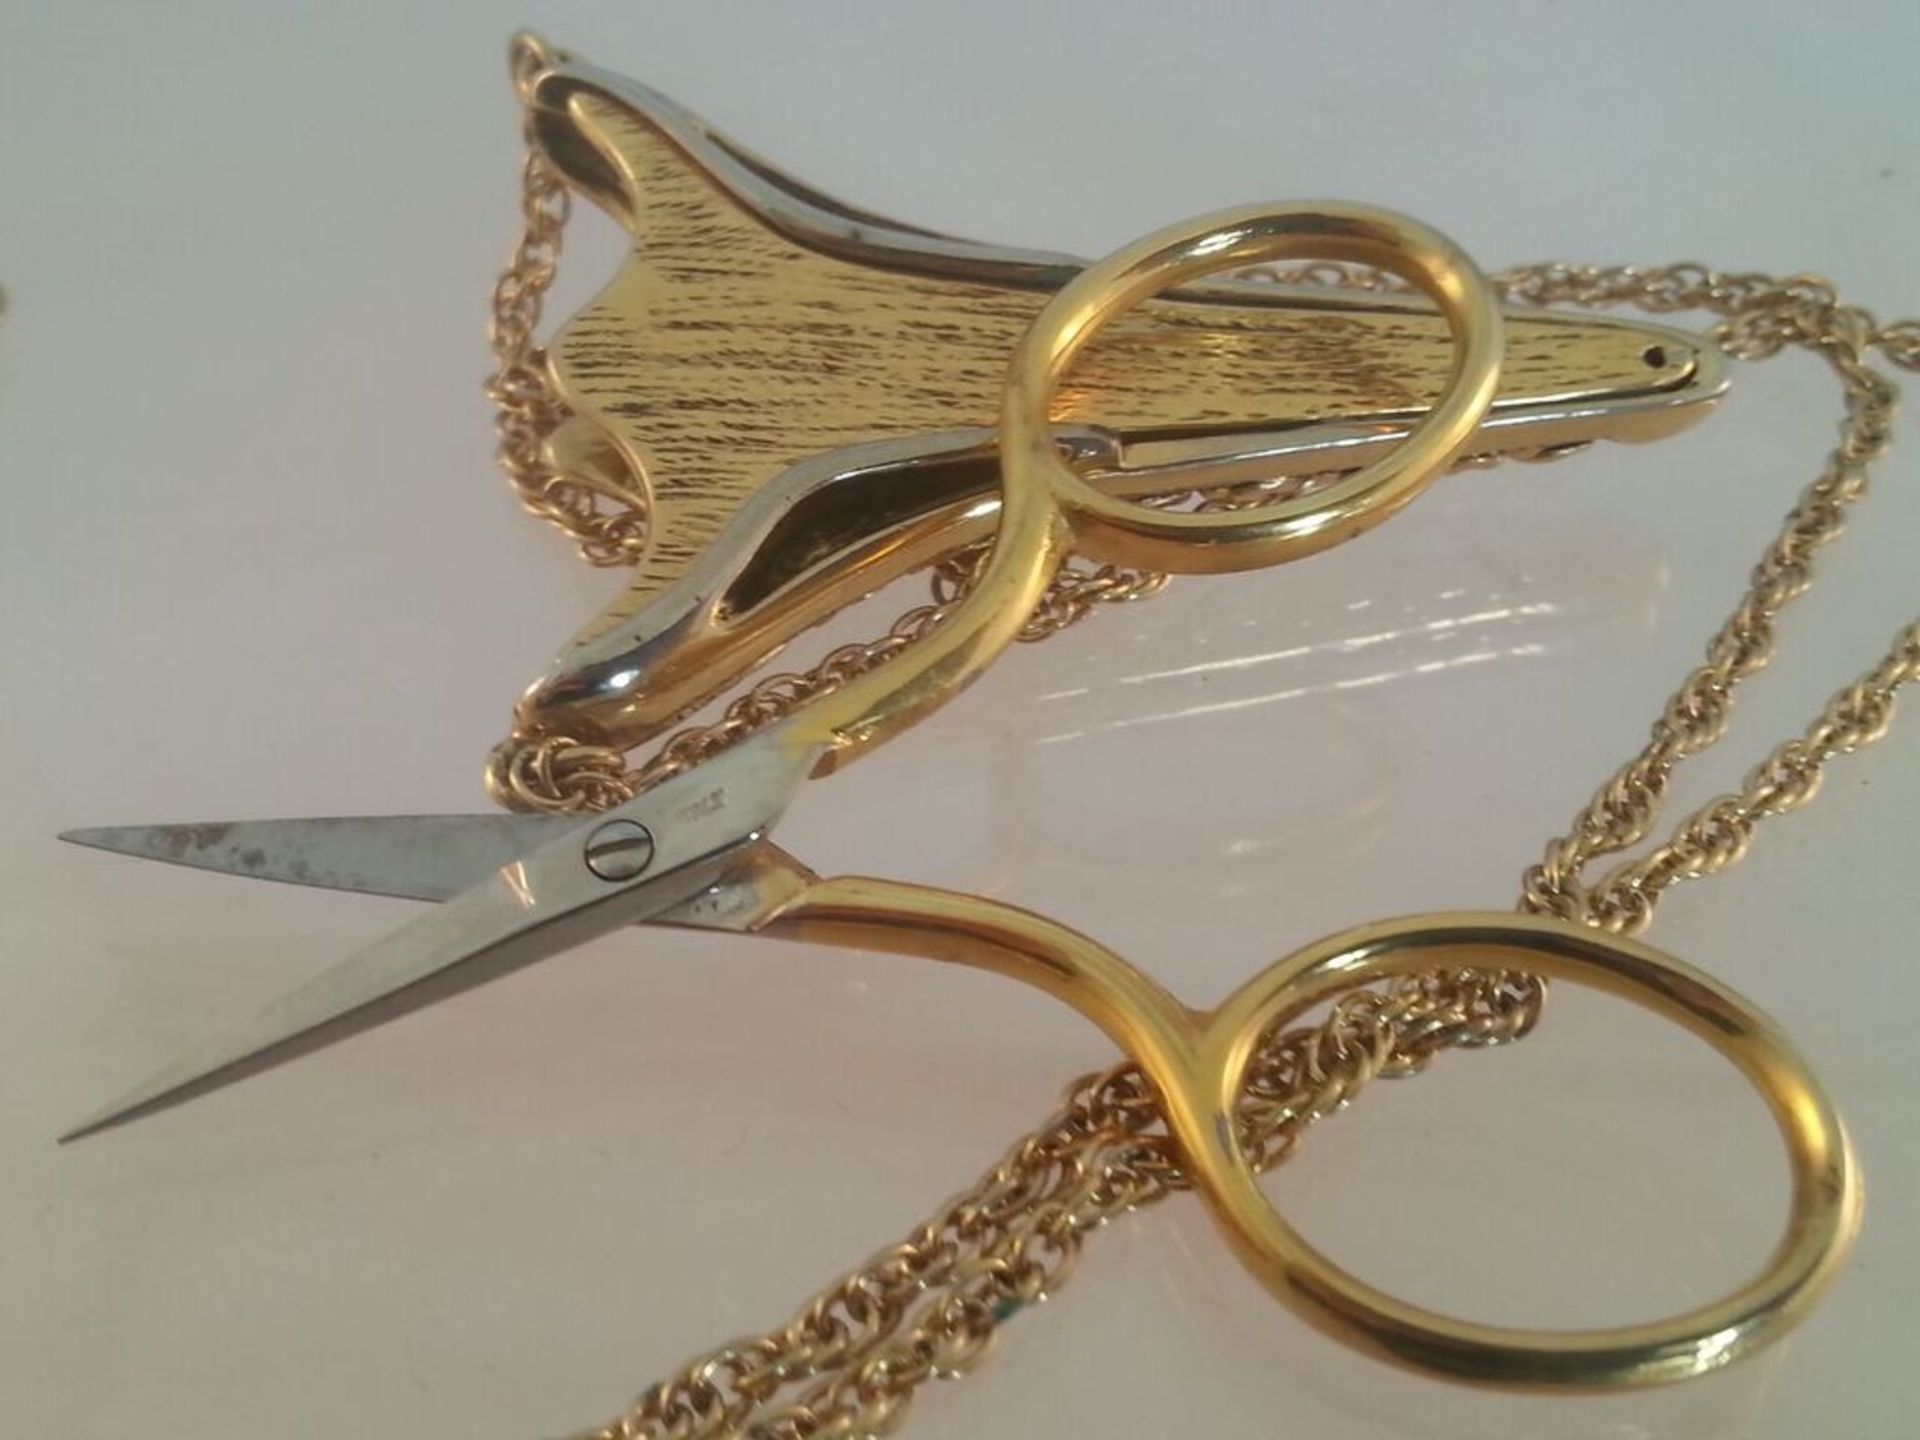 Vintage Italian seamstress scissors with case on chain, the chain length is approx 70cm. A beautiful - Image 2 of 2